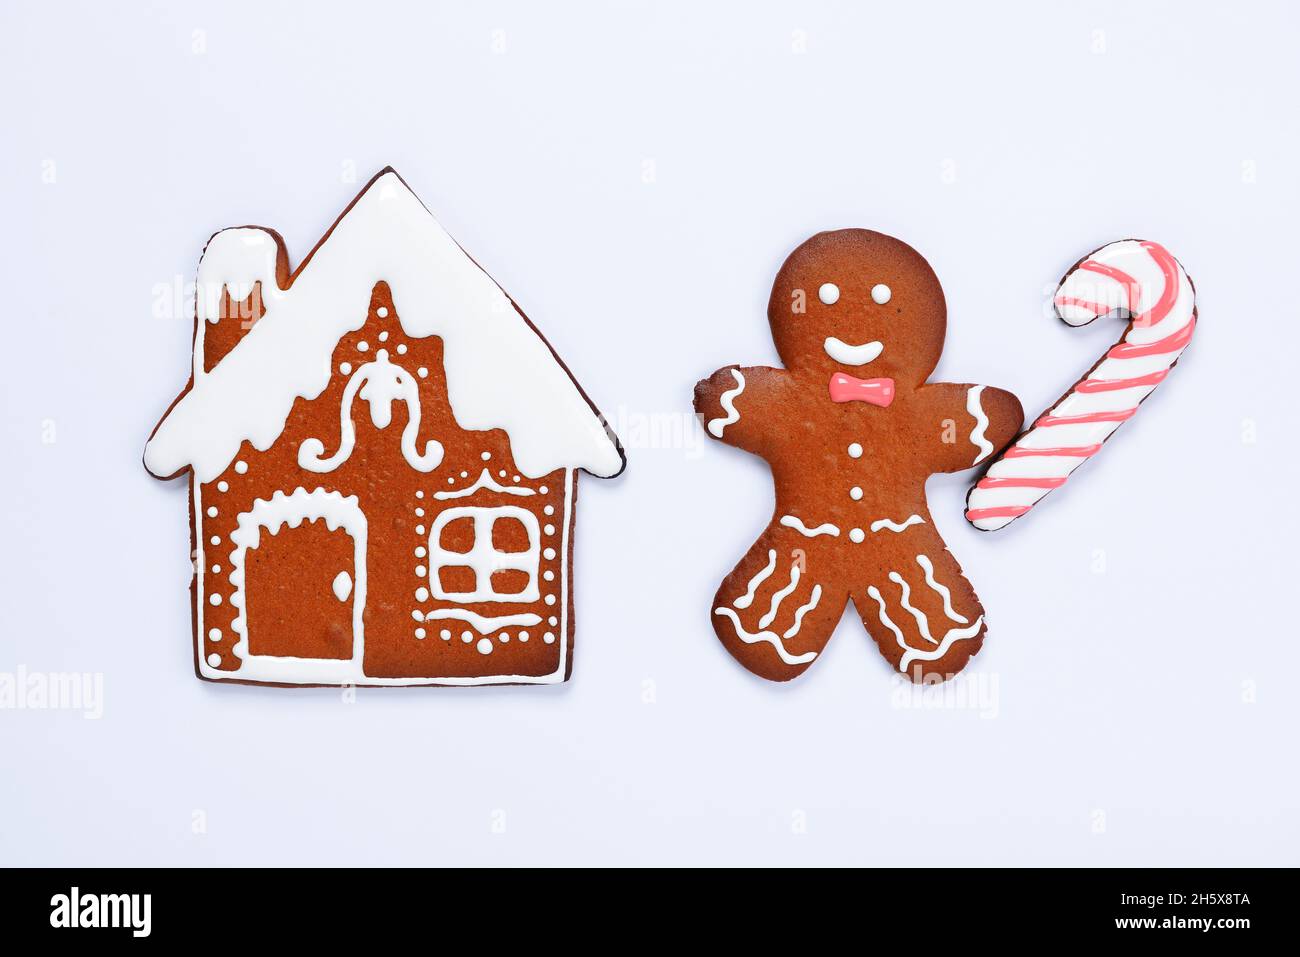 The hand-made eatable gingerbread house, little man with caramel on blue background Stock Photo